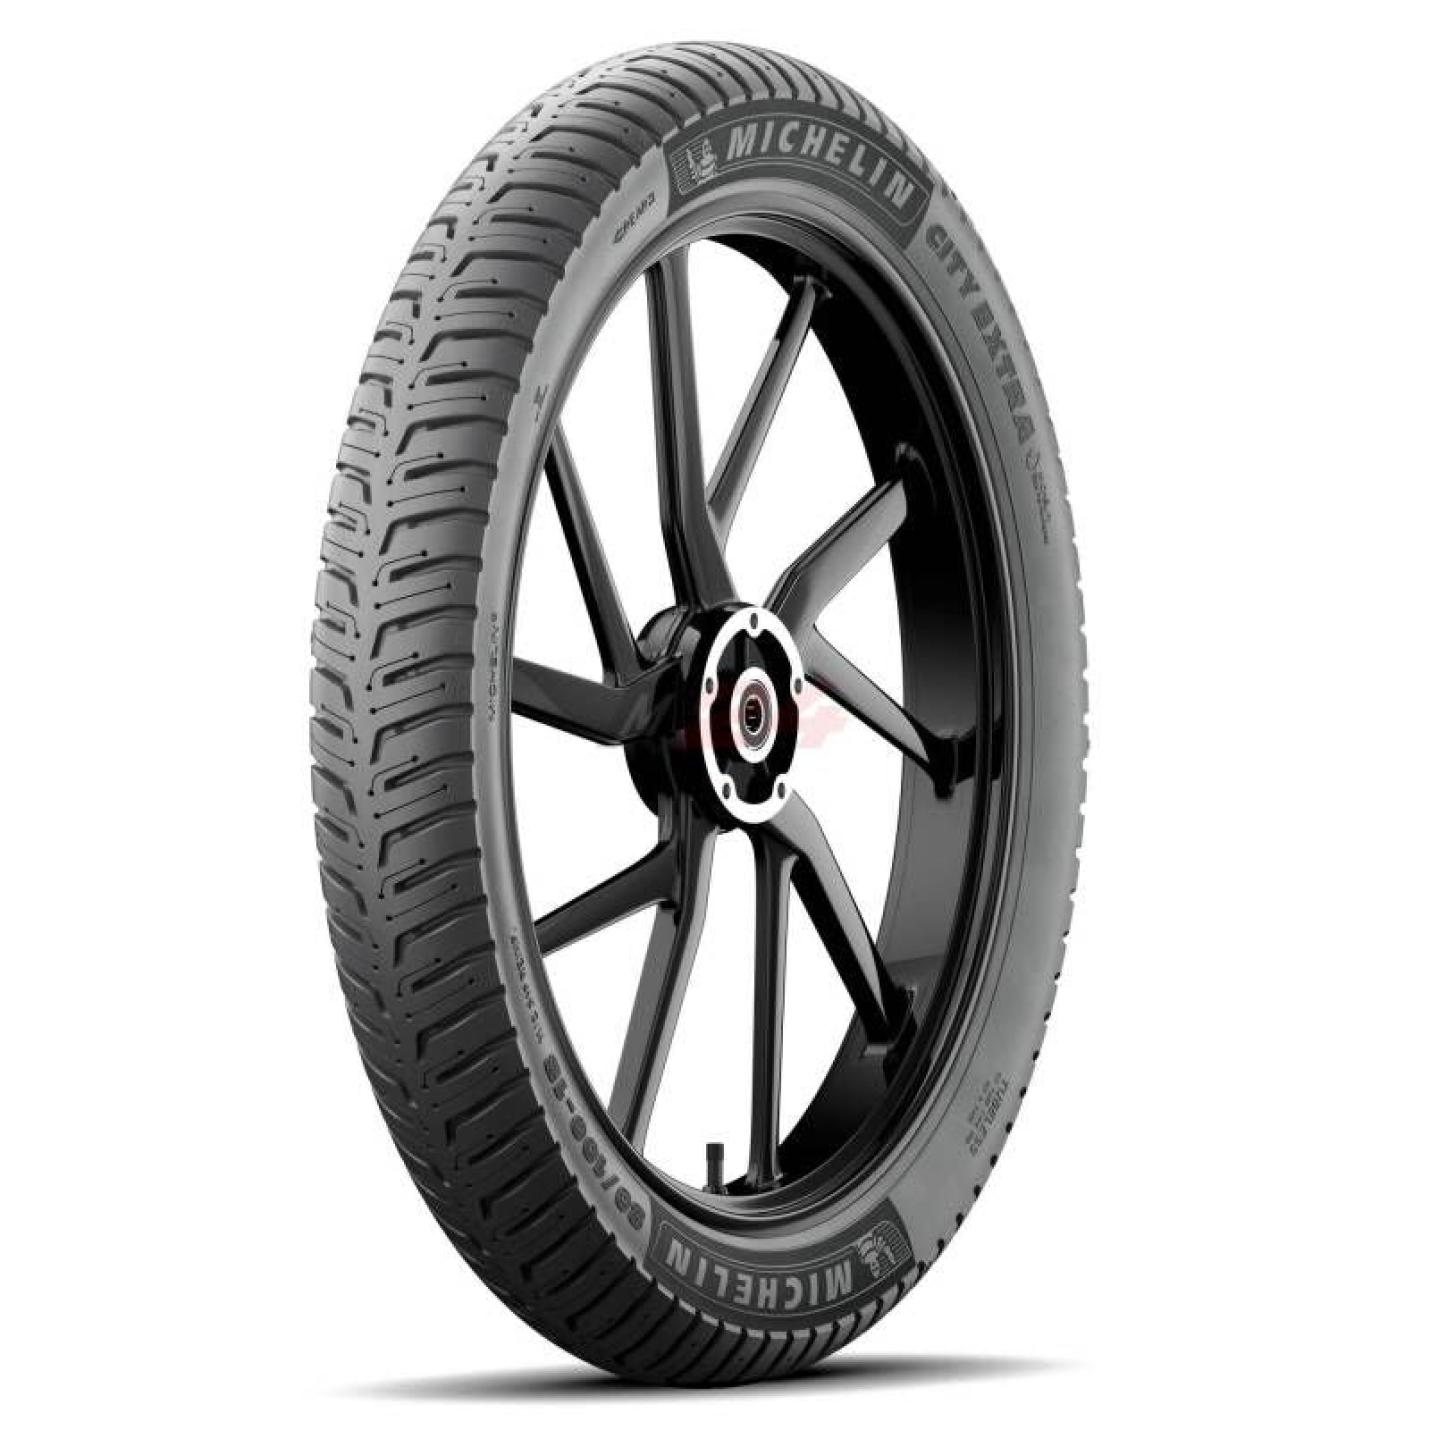 Buitenband 2.75-18 Michelin Reinf City Extra TL AE-trading